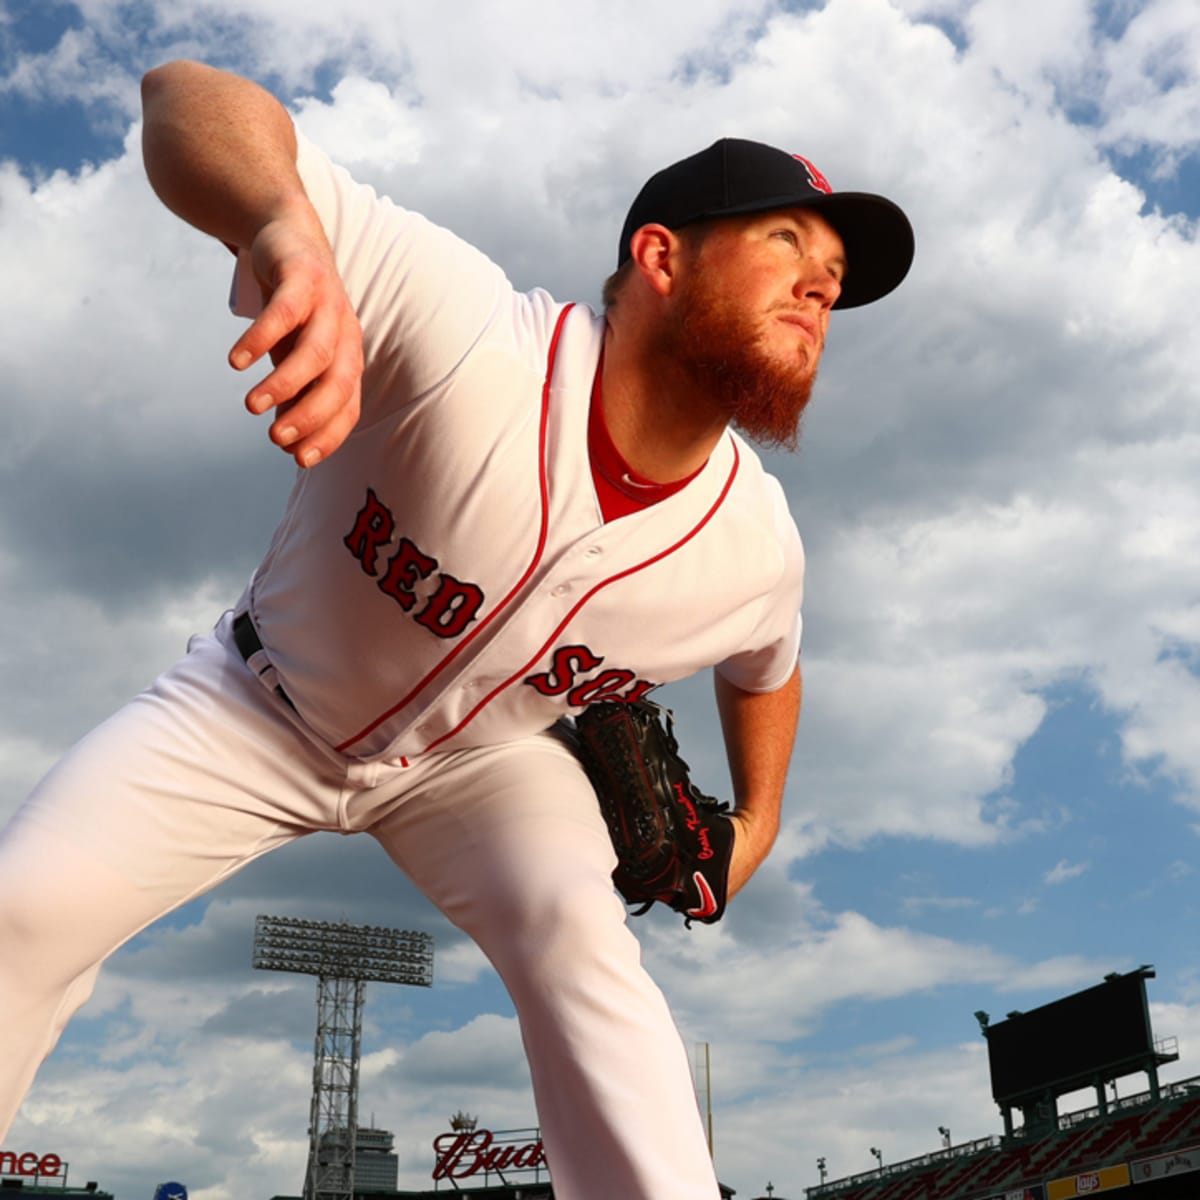 Craig Kimbrel gifts pair of cleats to young fan who was